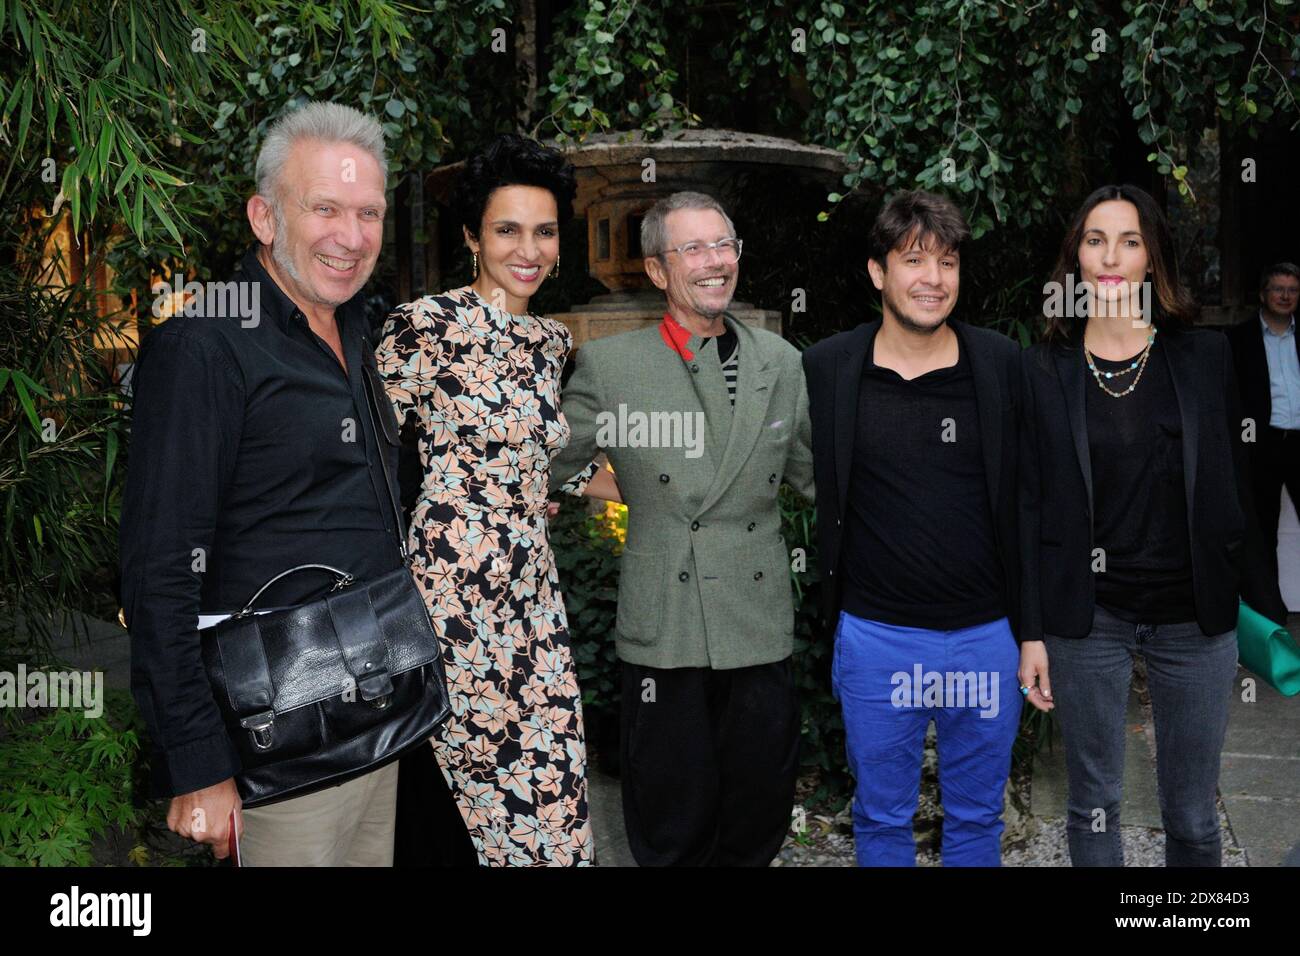 Farida Khelfa, Jean-Paul Goude, Jean Paul Gaultier attending the Louboutin  Documentary Premiere at Cinema La Pagode in Paris, France, on September 9,  2014. Photo by Alban Wyters/ABACAPRESS.COM Stock Photo - Alamy